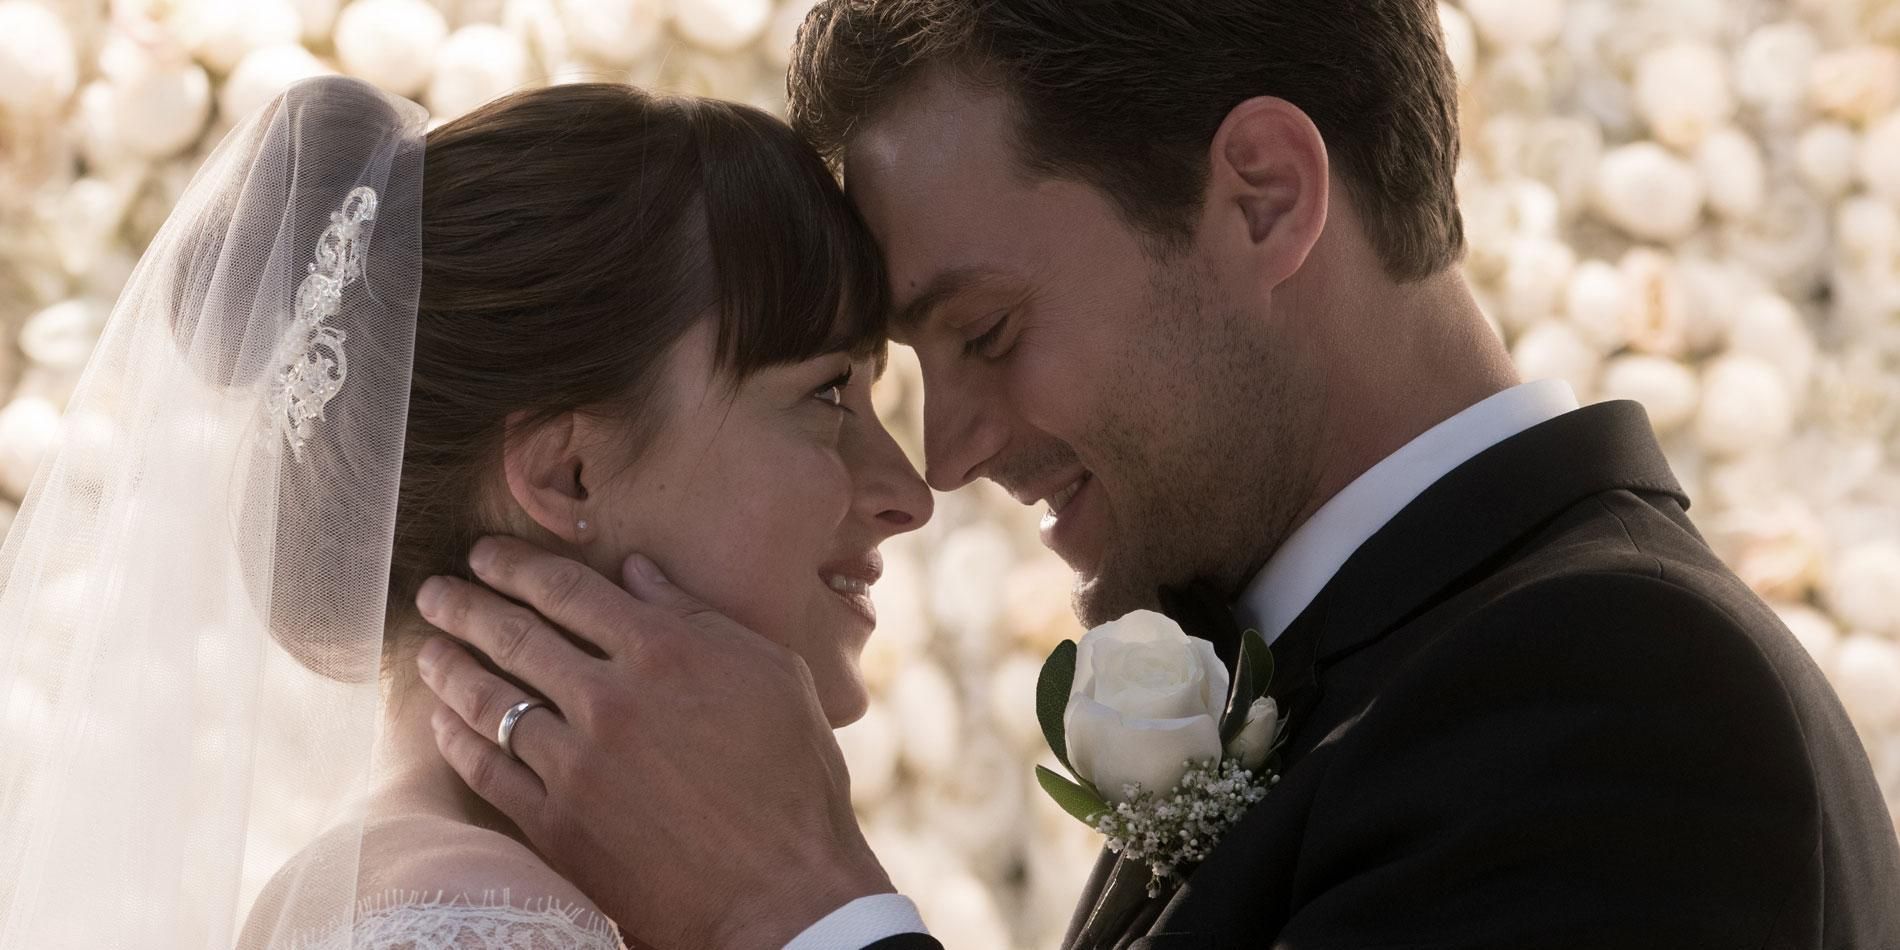 Anastasia and Christian get married in Fifty Shades Freed